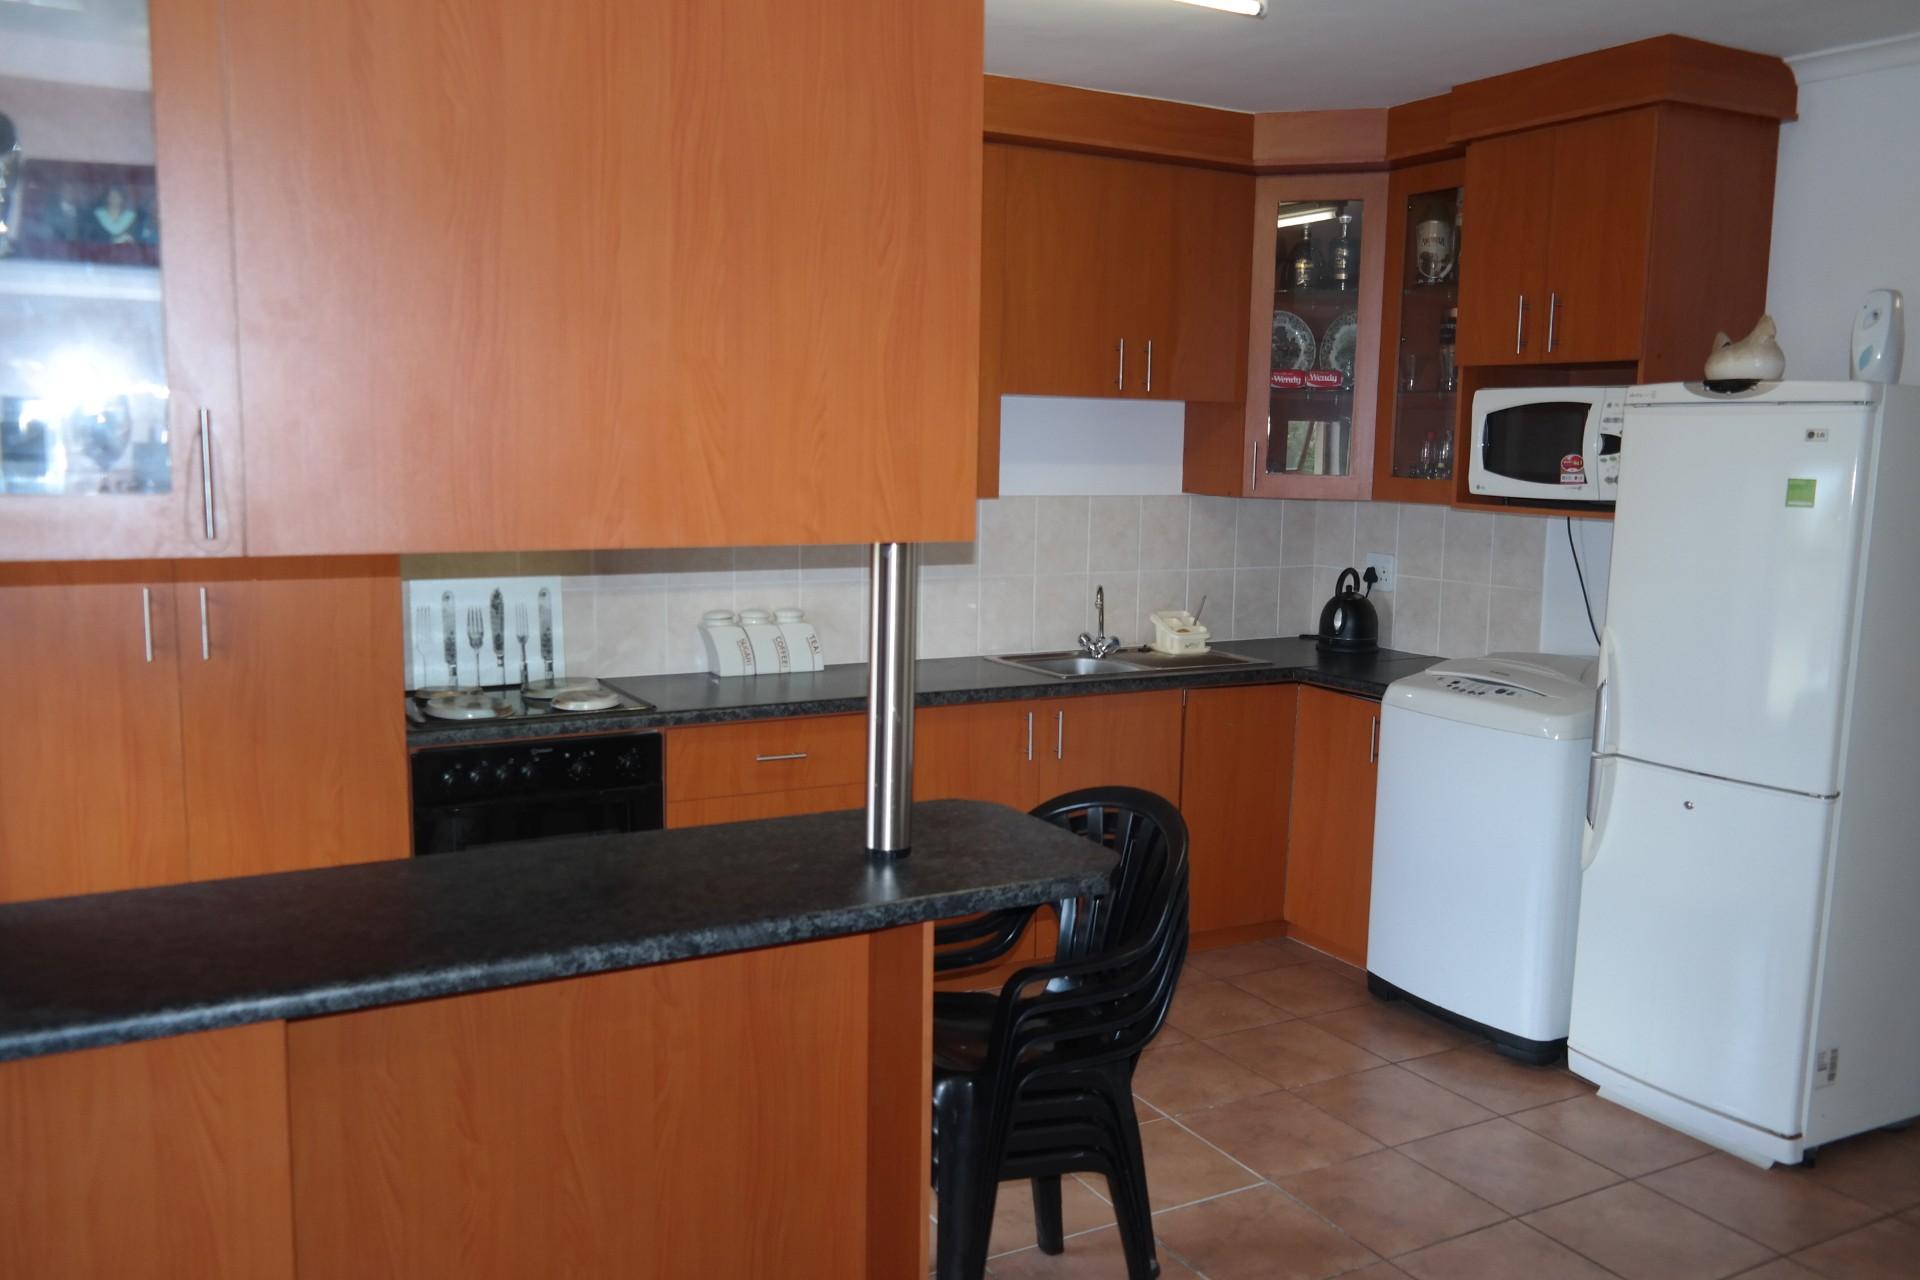 Kitchen - 15 square meters of property in Blue Downs